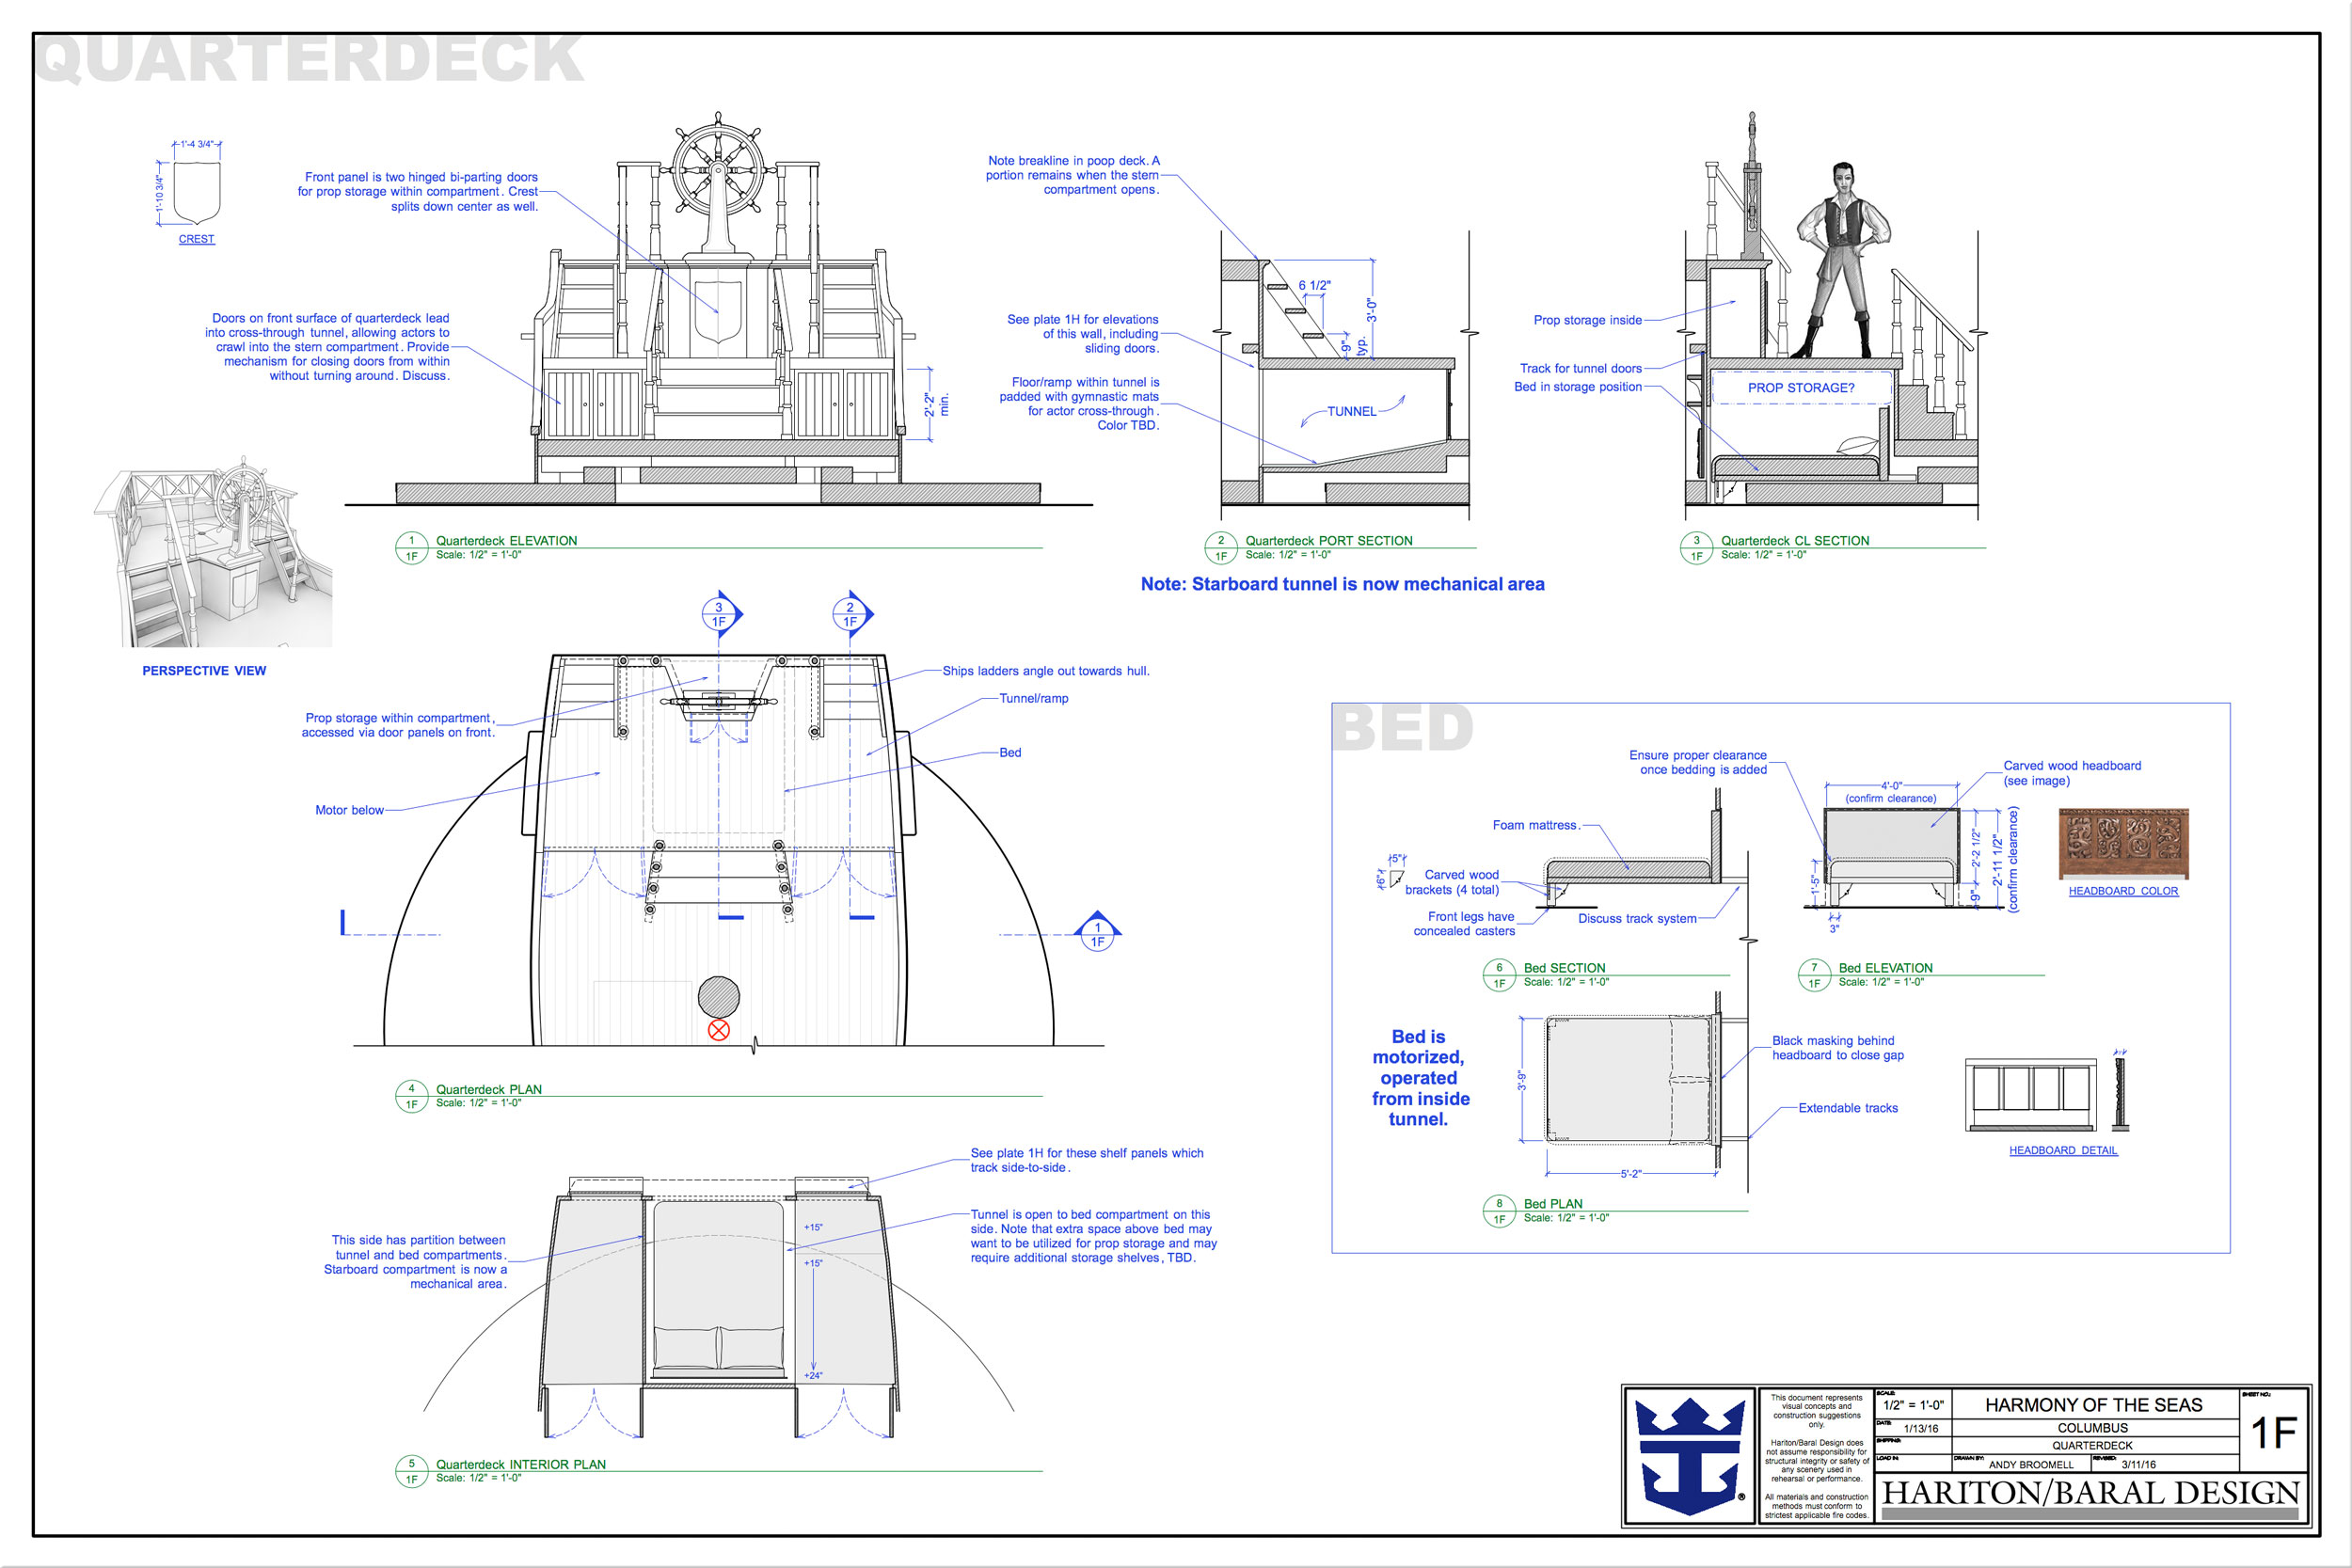 andy-broomell-drafting-columbus6-musical-vectorworks-scenic-design-scenery-plans-sailing-ship.jpg